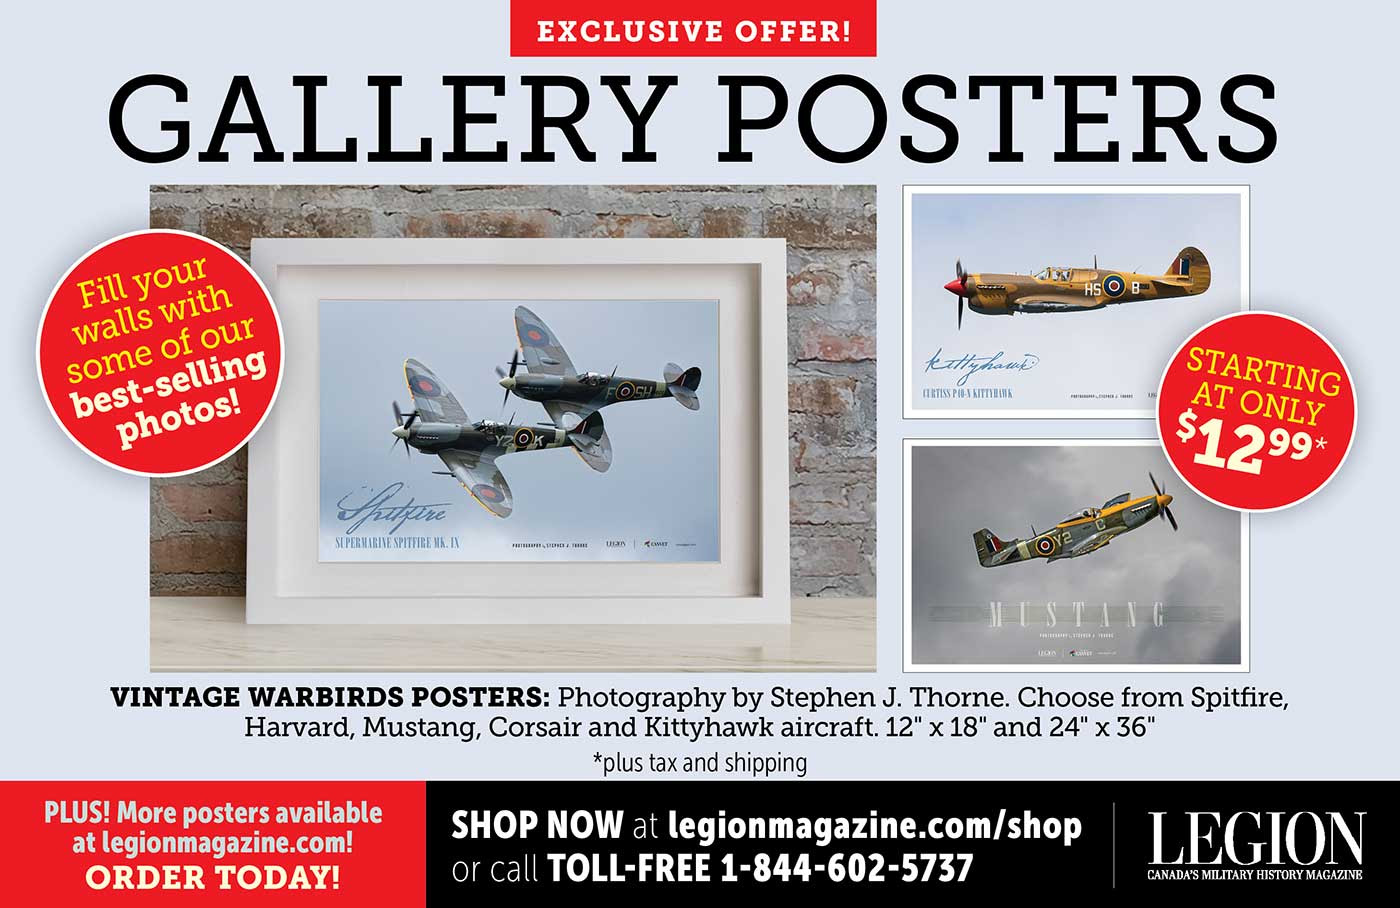 Exclusive offer! Gallery posters.
Starting at only $12.99.